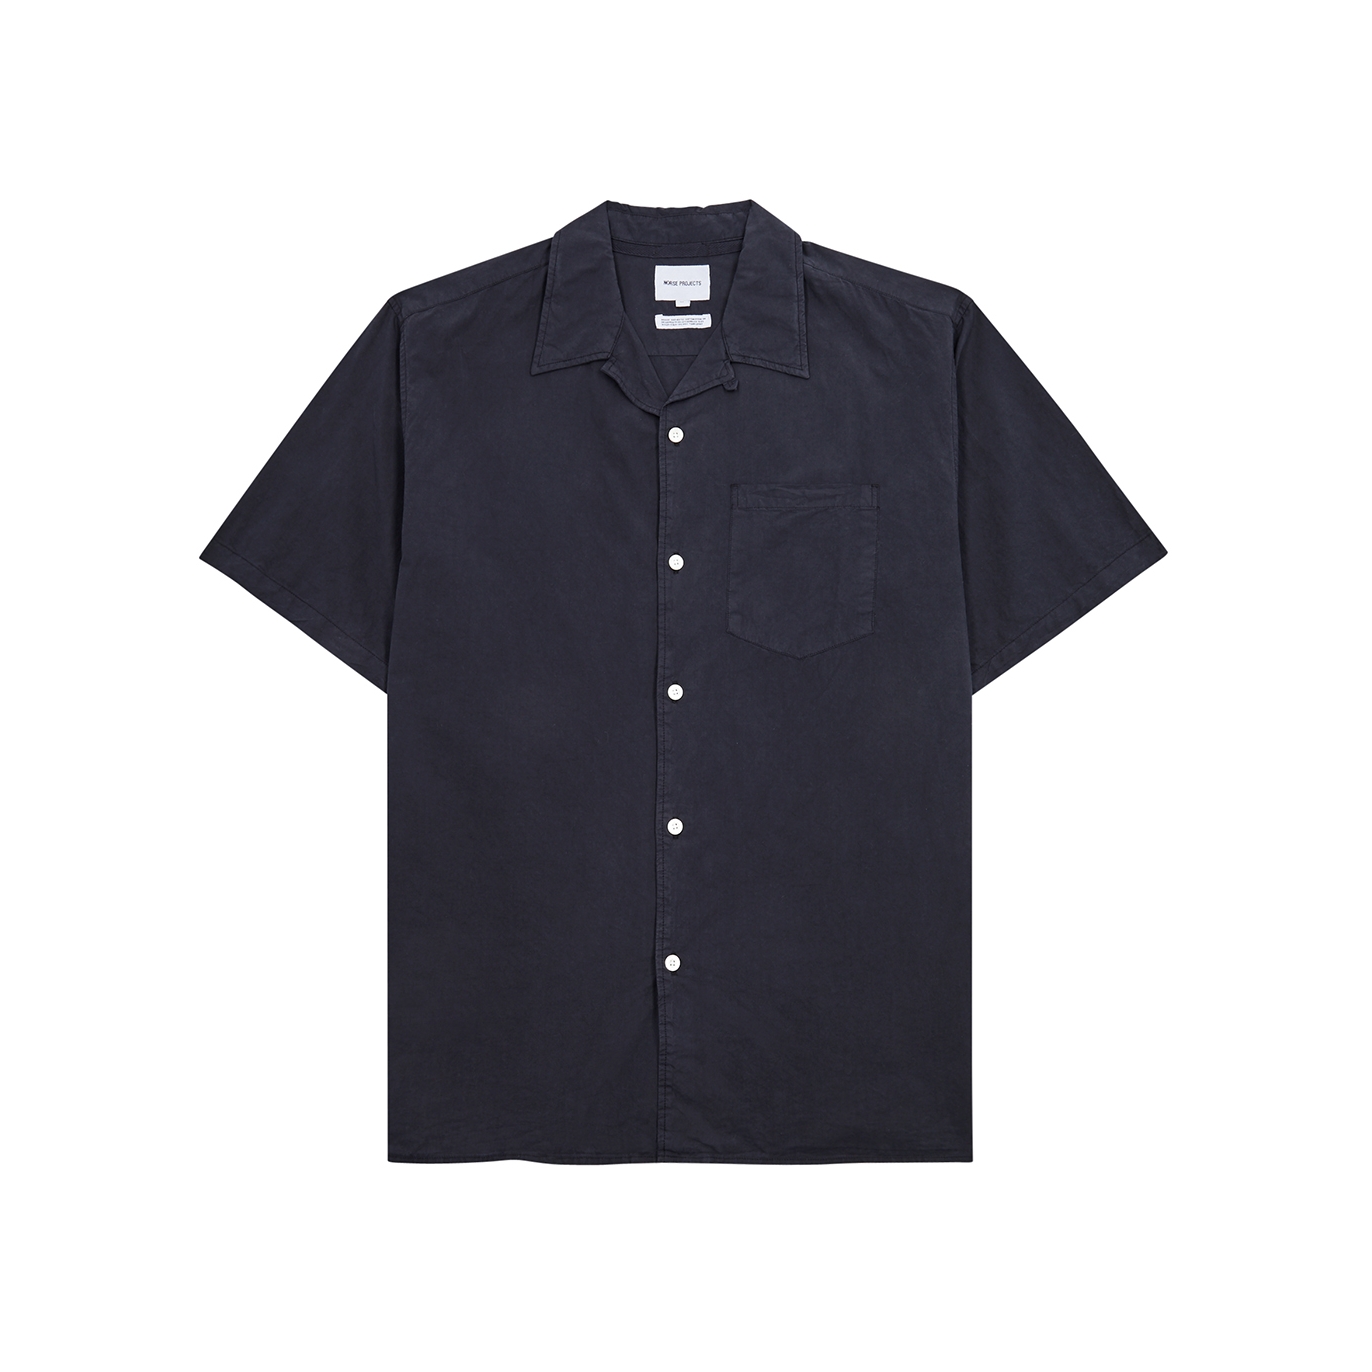 NORSE PROJECTS CARSTEN BRUSHED POPLIN SHIRT